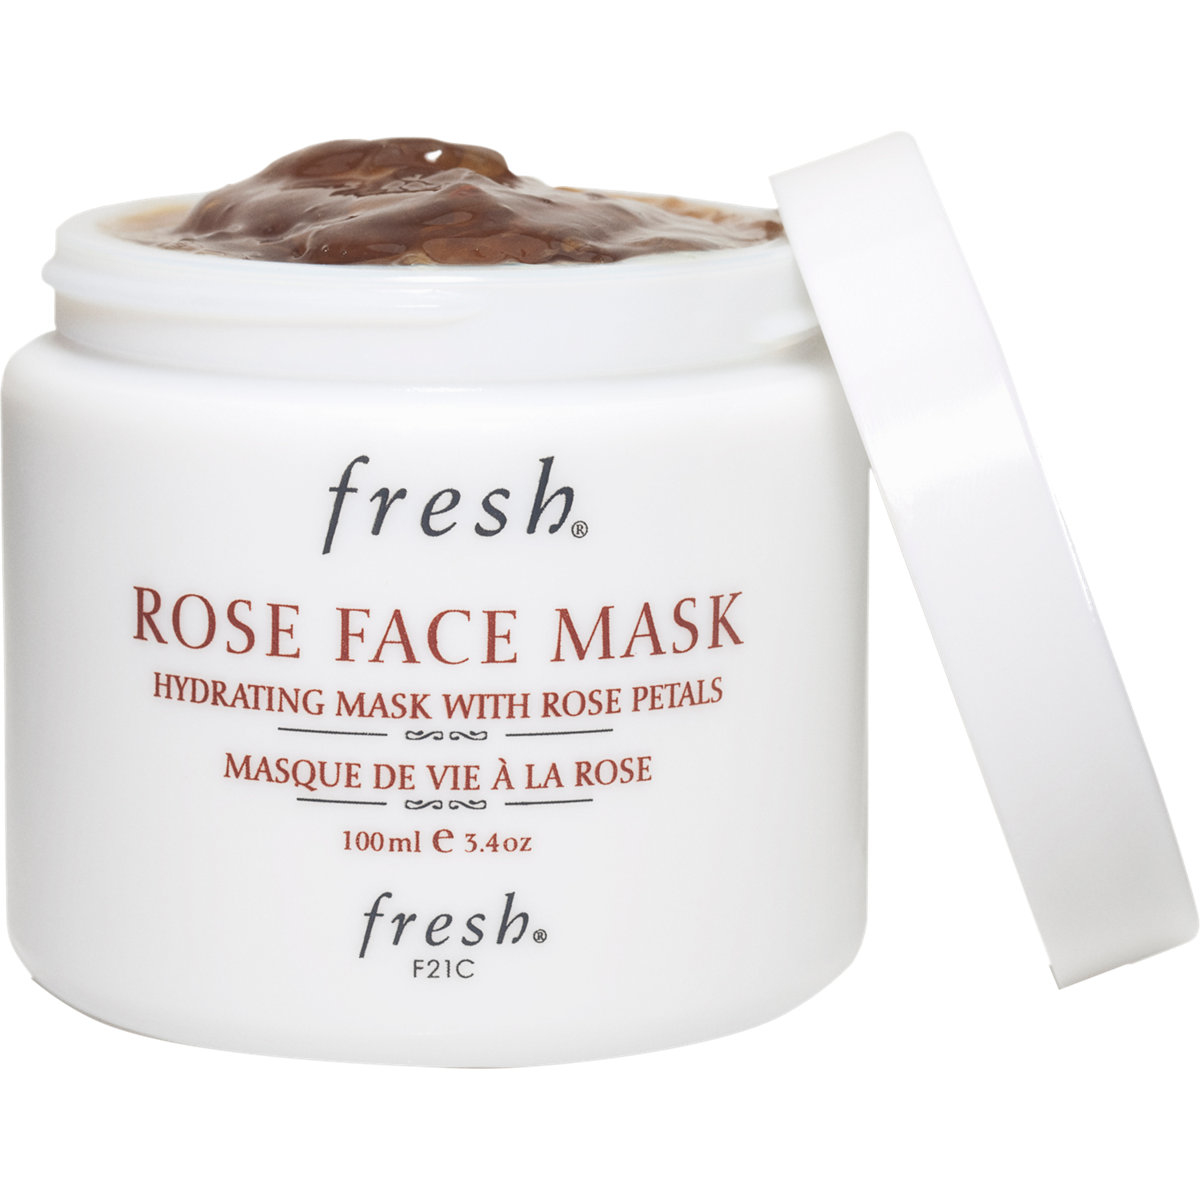 purchase a mask of the rose